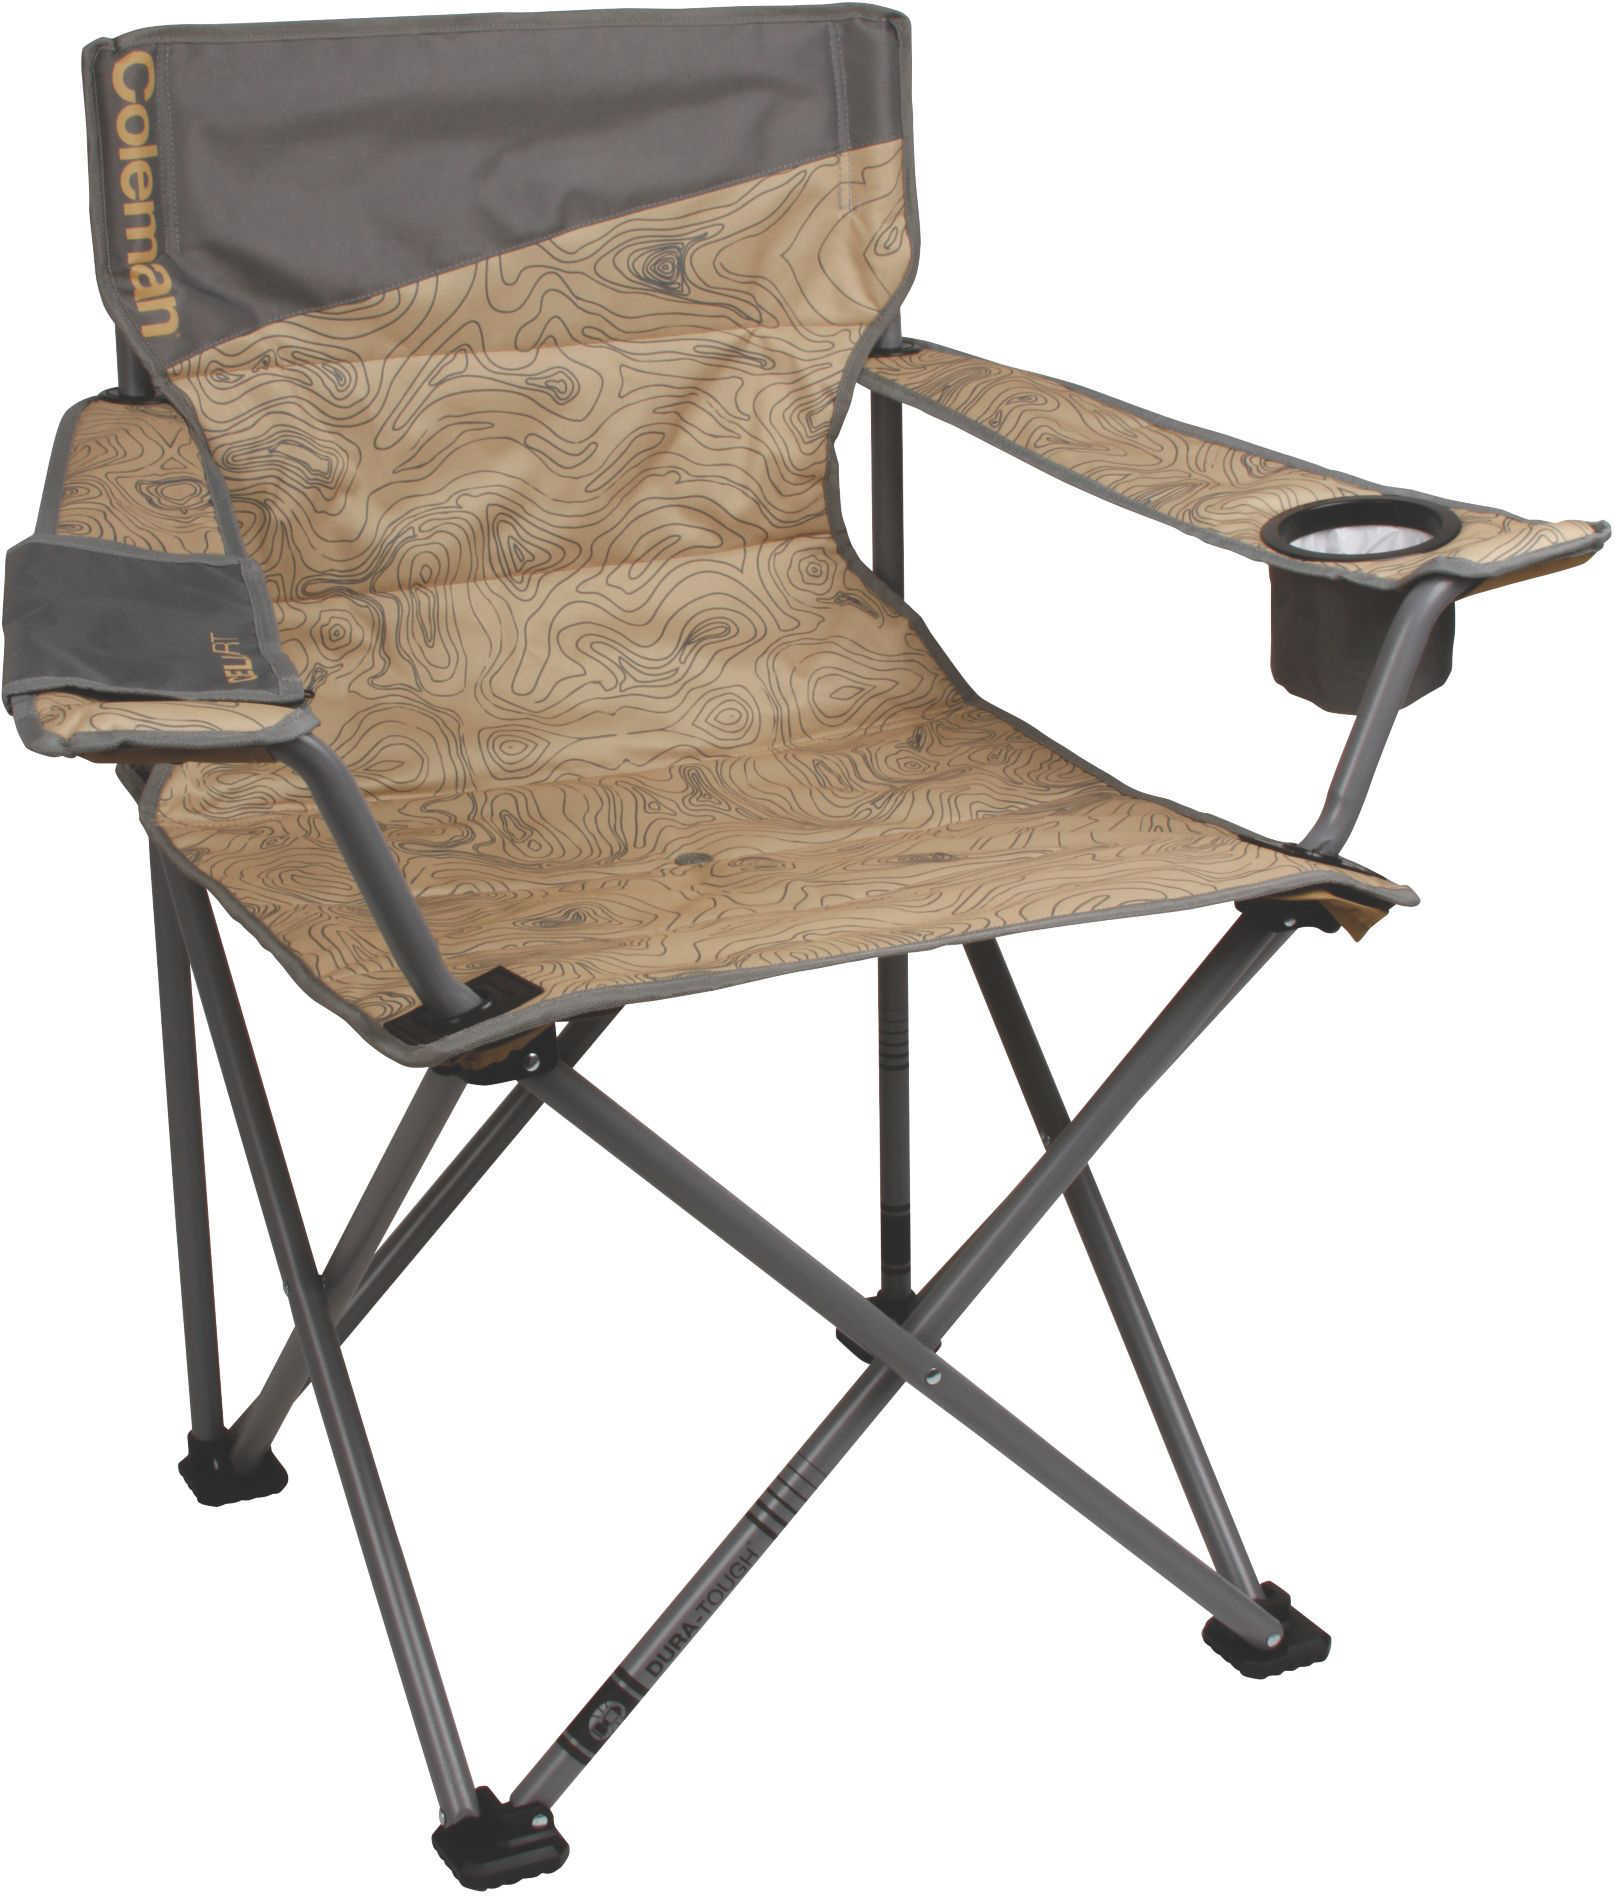 Coleman Chair Quad, Oversized, Topo Print Md: 2000023590